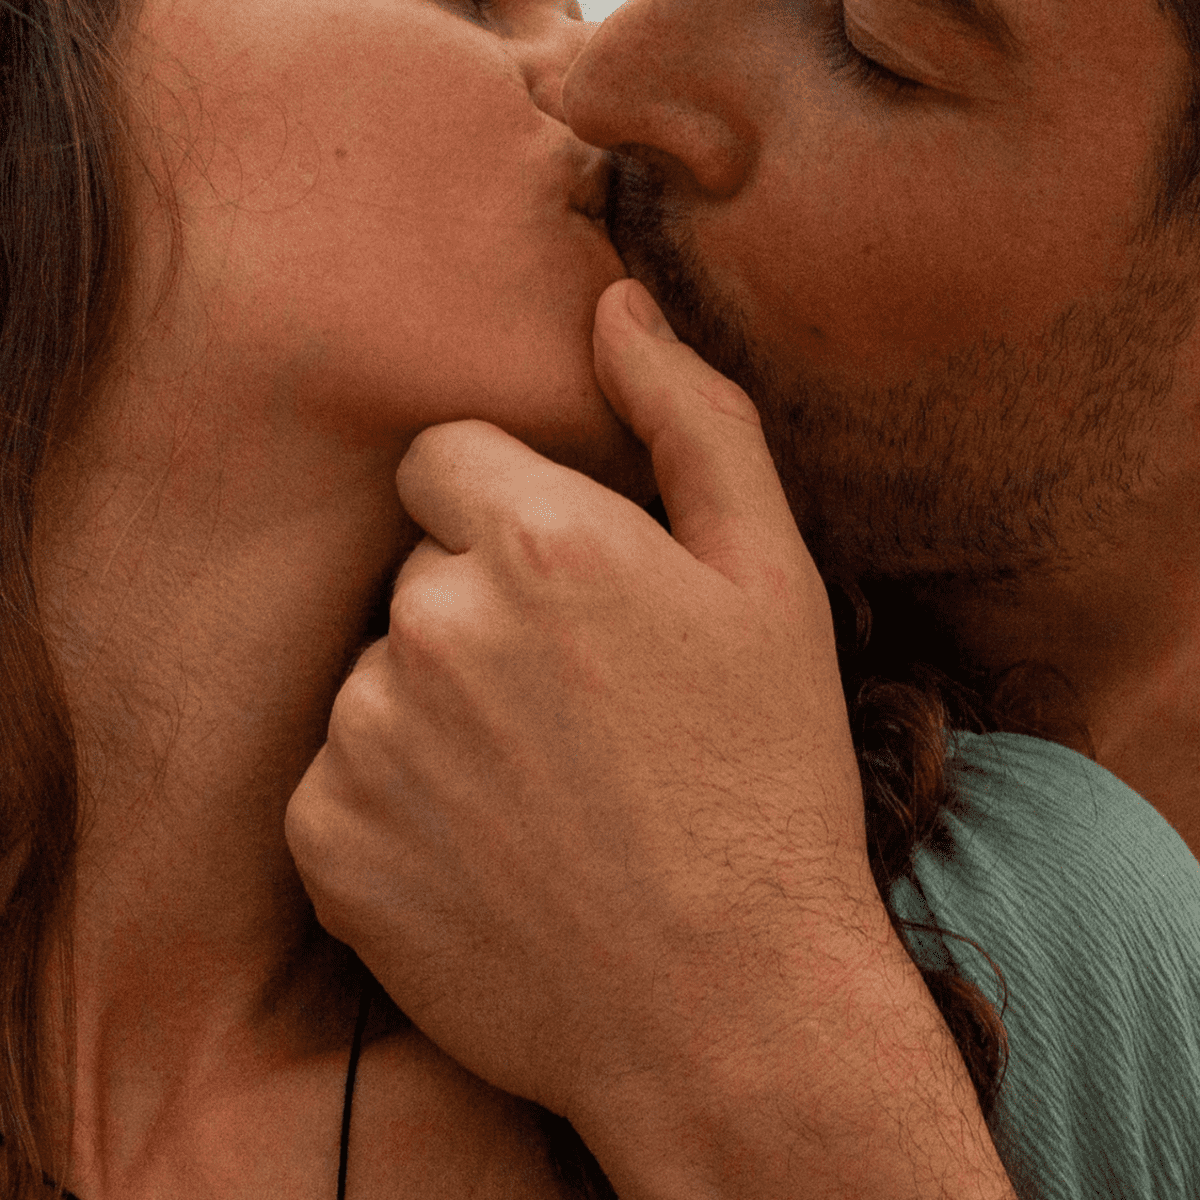 Why Do We Kiss With Tongues? The Science and Psychology of French Kissing